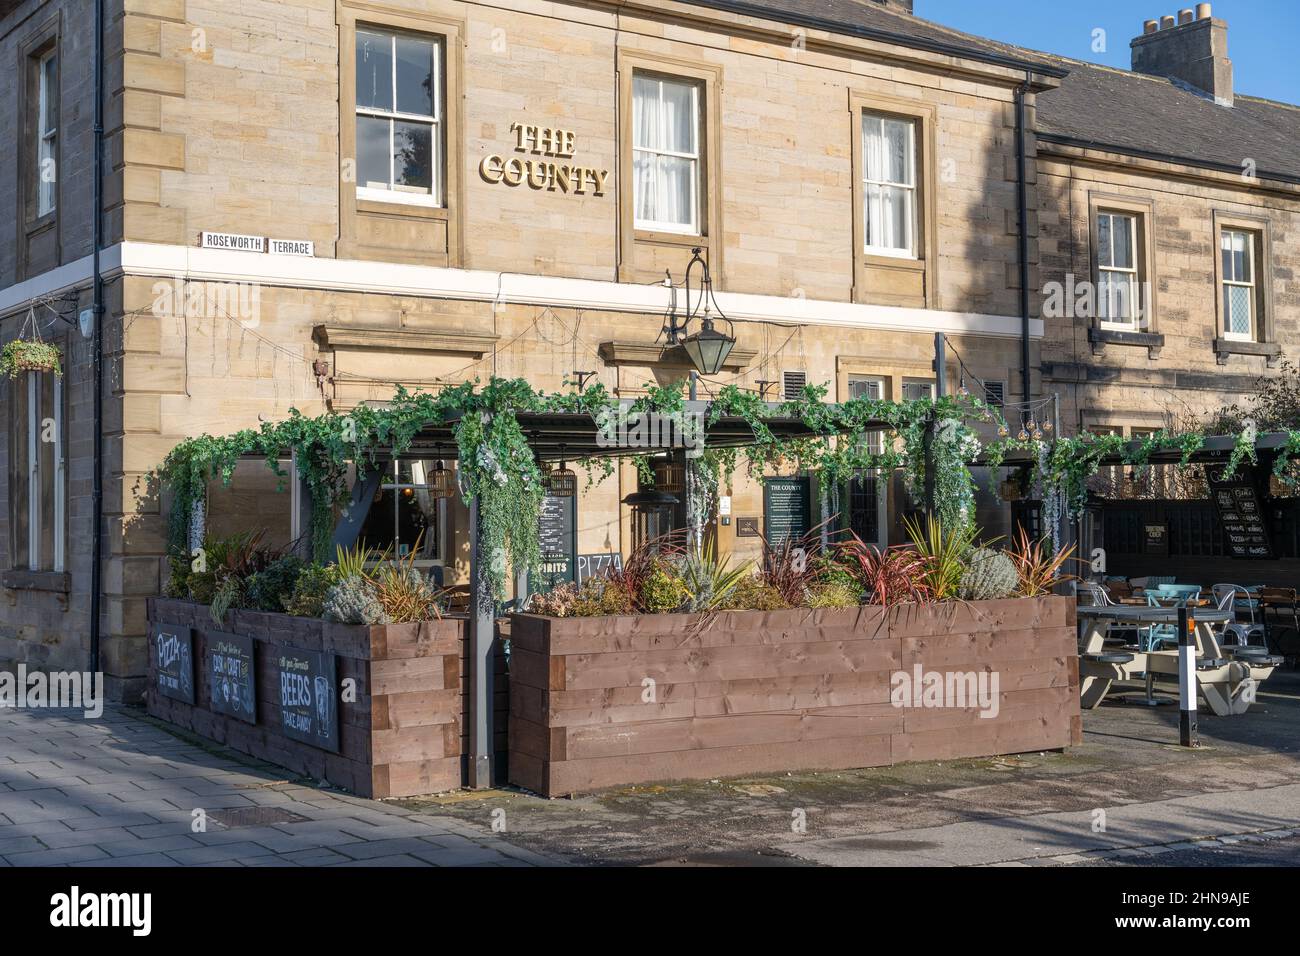 The County public house, on High Street, Gosforth, Newcastle upon Tyne, UK, with beer garden in the outdoor space. Stock Photo